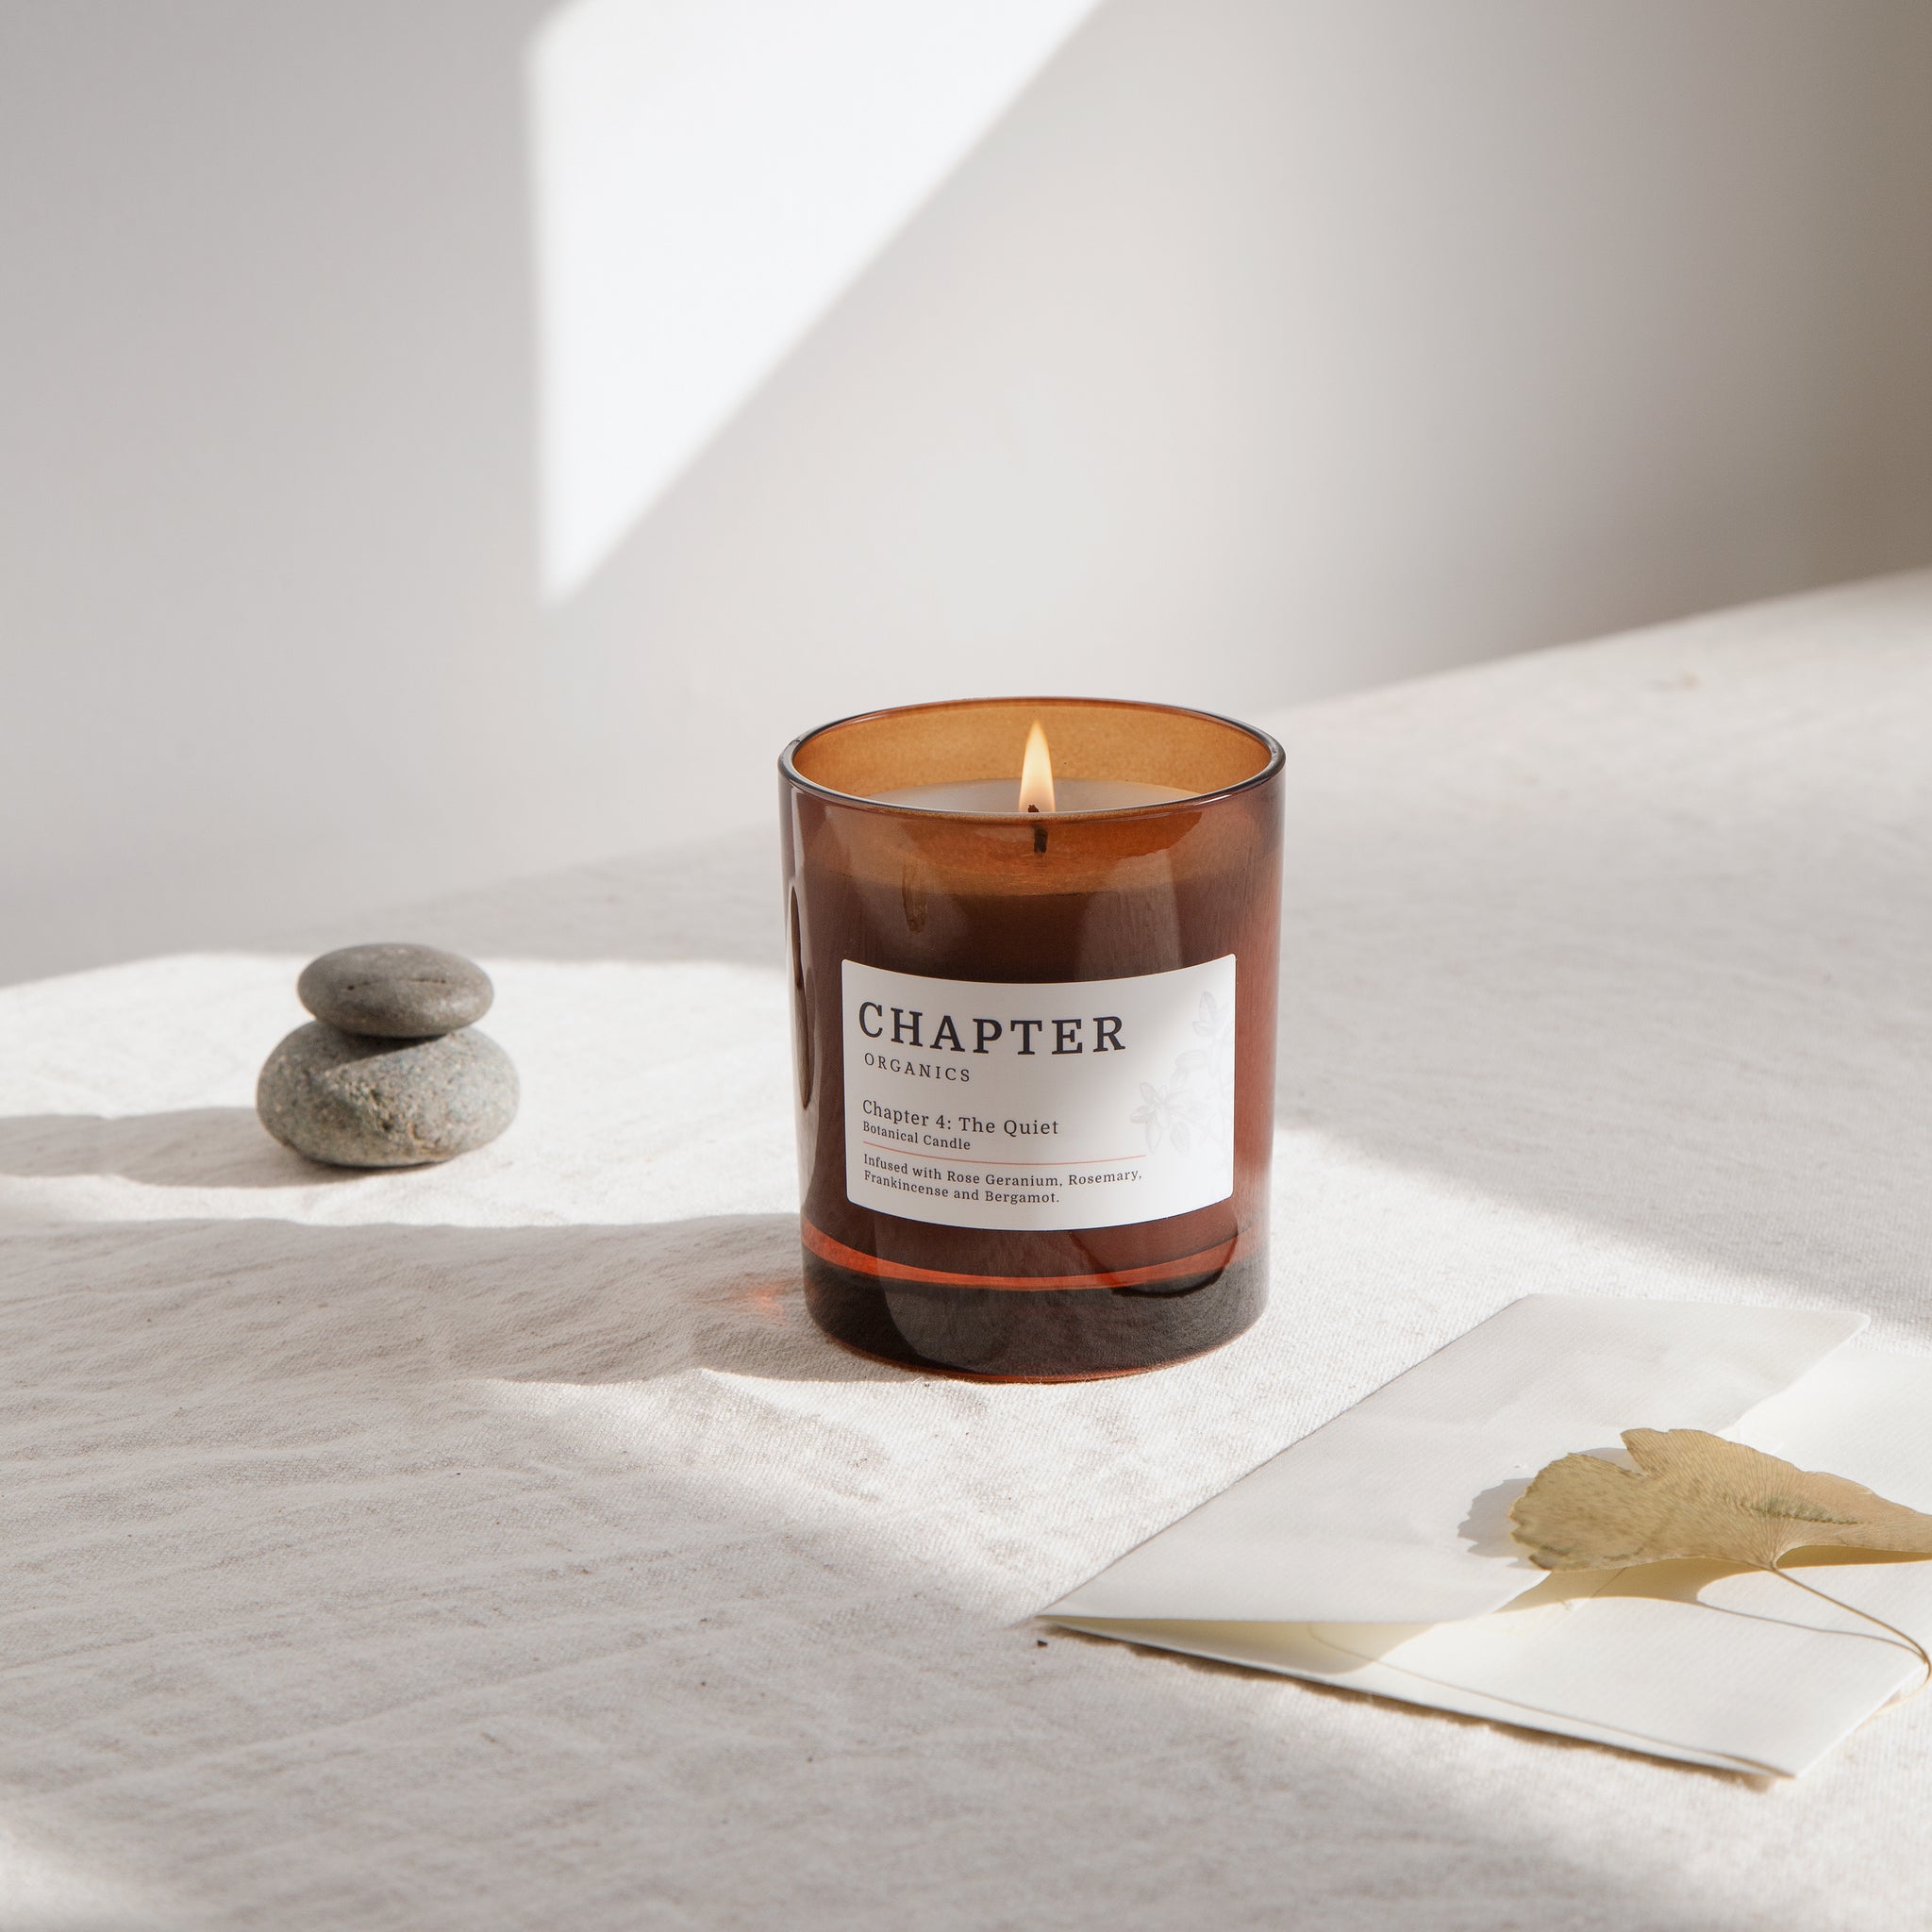 The Quiet Aromatherapy Luxury Candle